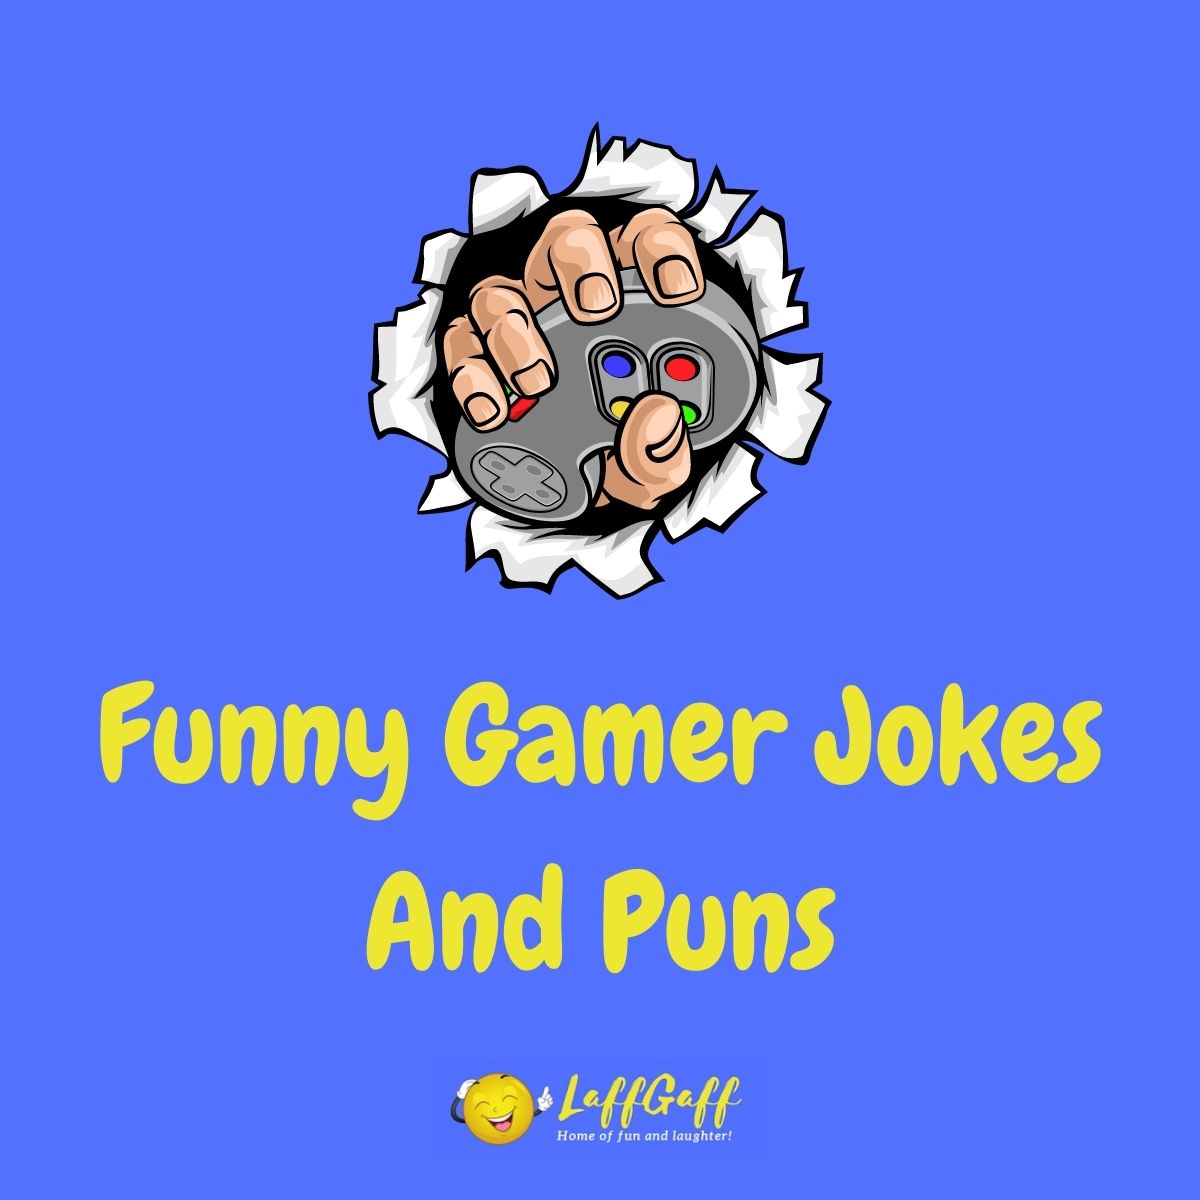 Featured image for a page of funny gamer jokes and puns.